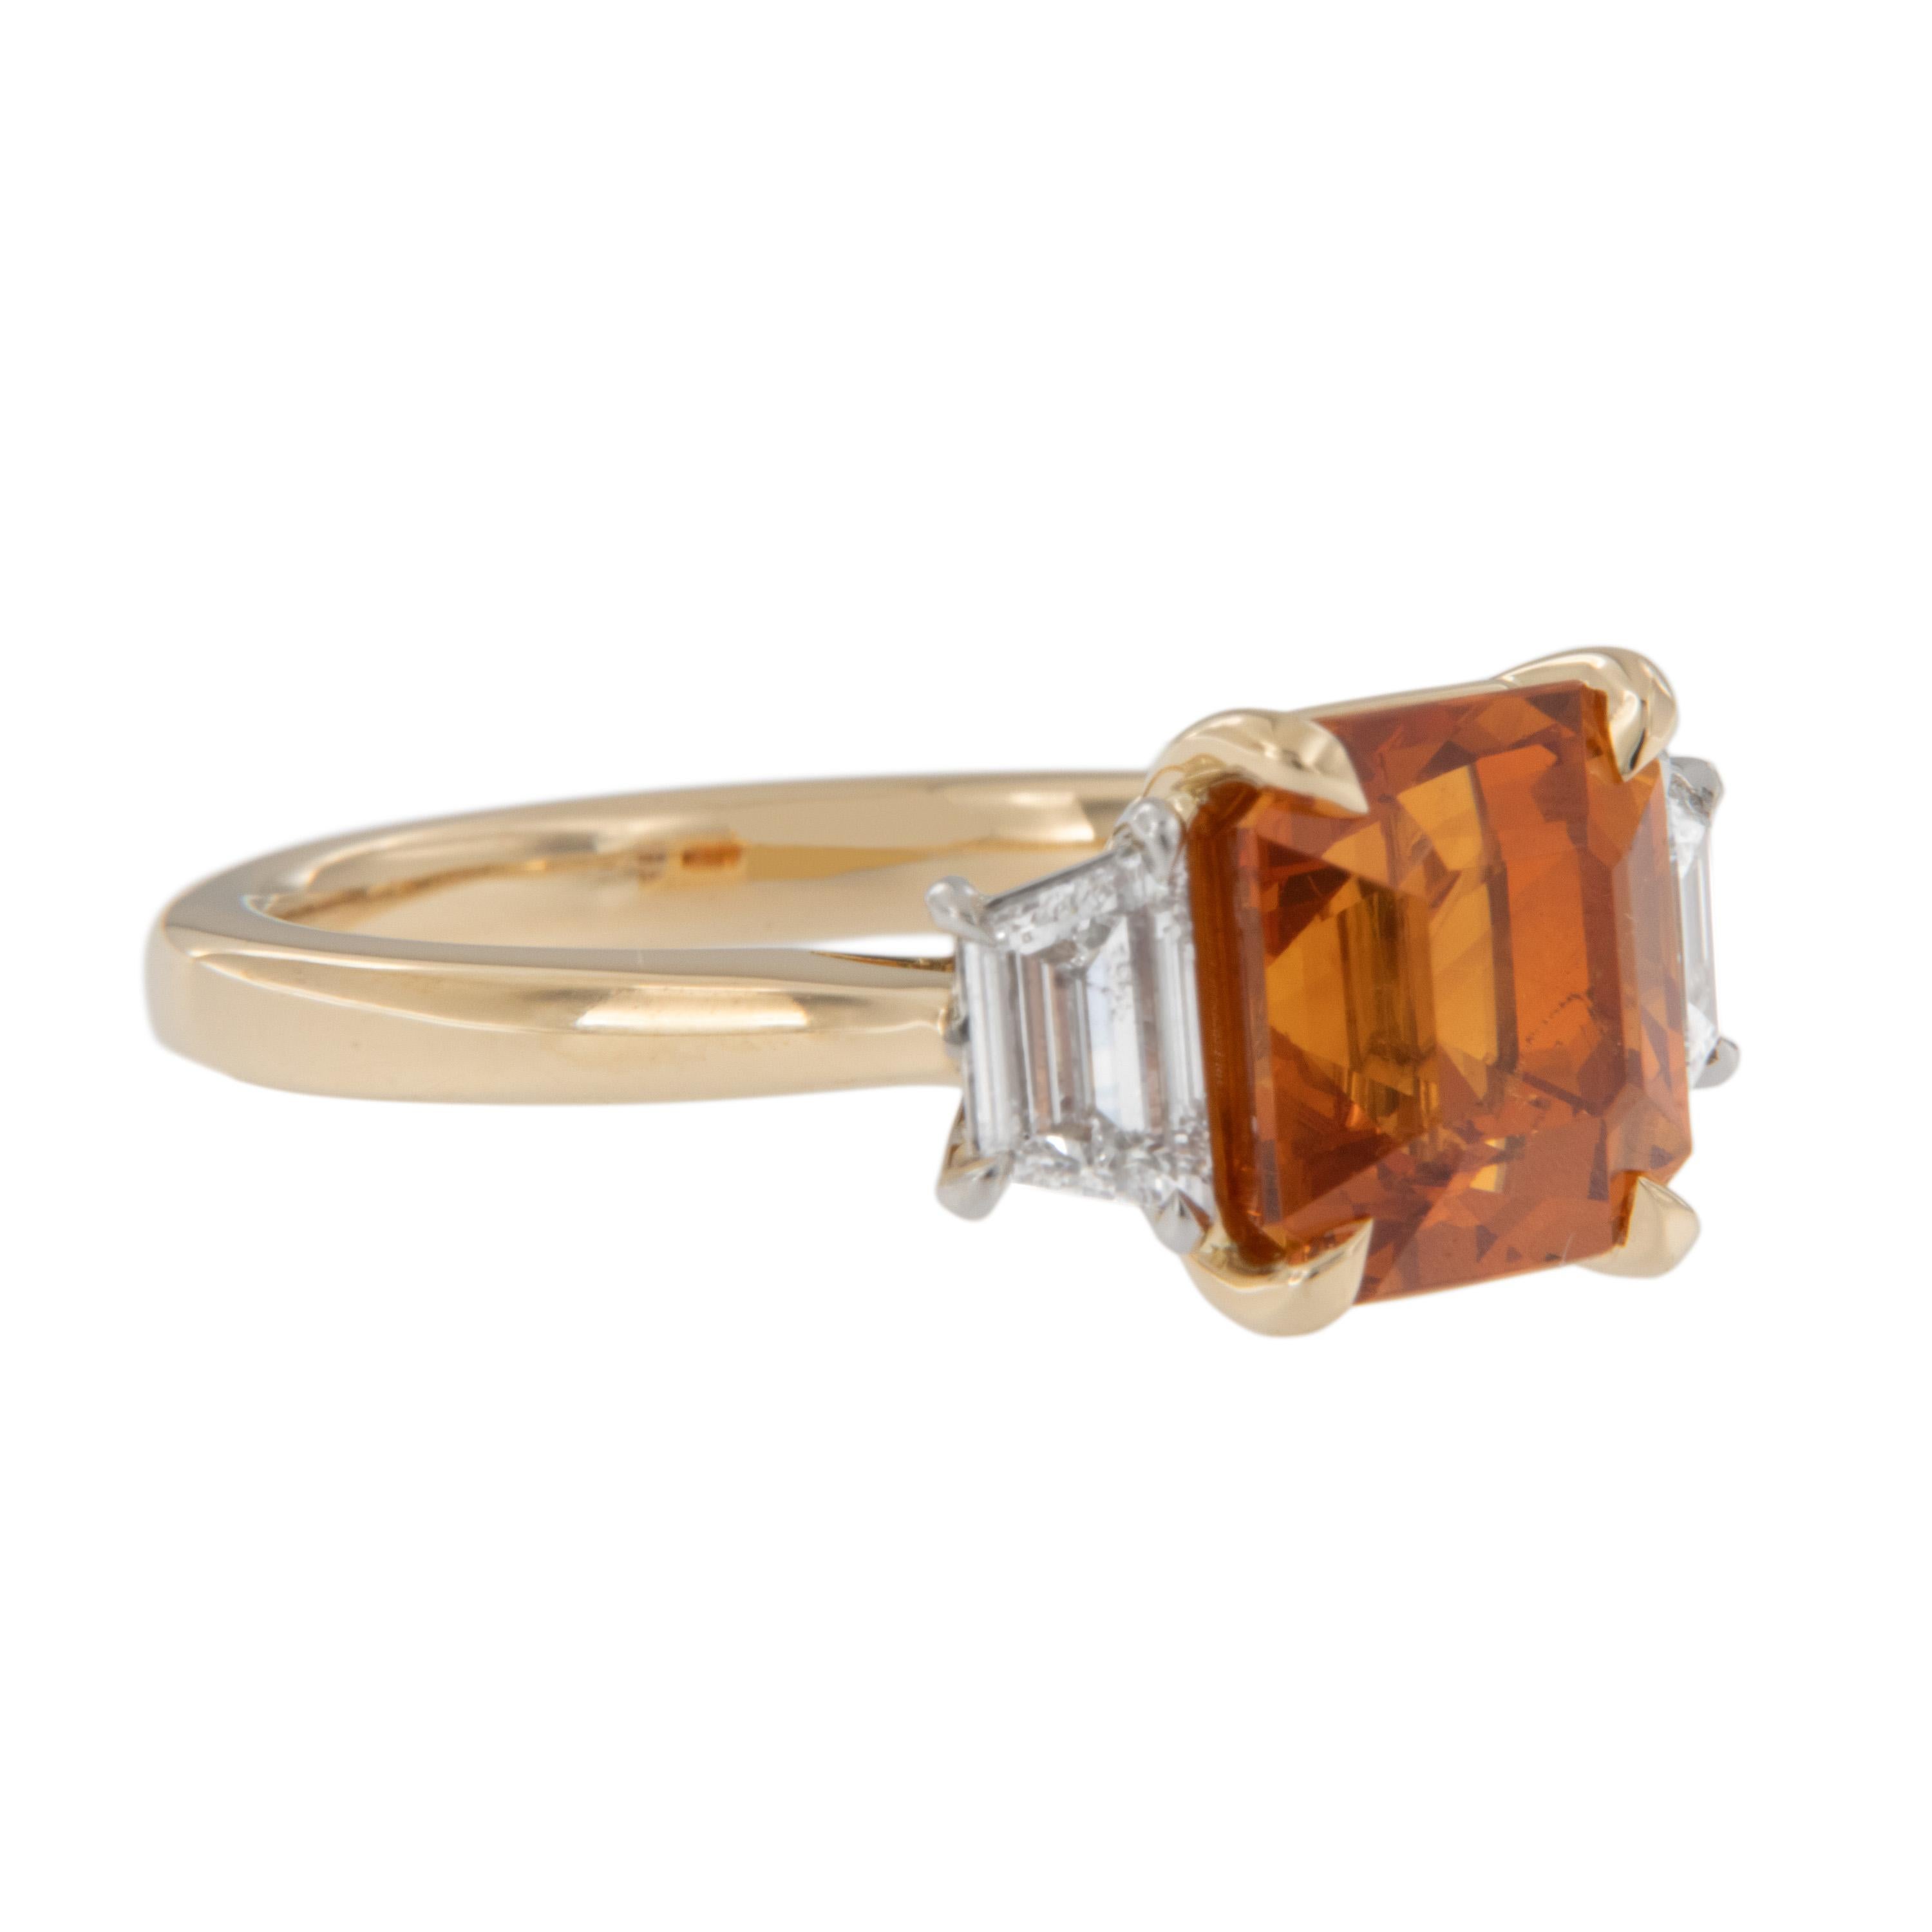 Fire hot! Exquisitely hand fabricated 18 karat yellow gold and platinum ring featuring a magnificent 4.71 Carat Mandarin Spessartine Garnet with GIA Identification Report# 6224178876. This rare gemstone is exceptional in size, color and clarity.